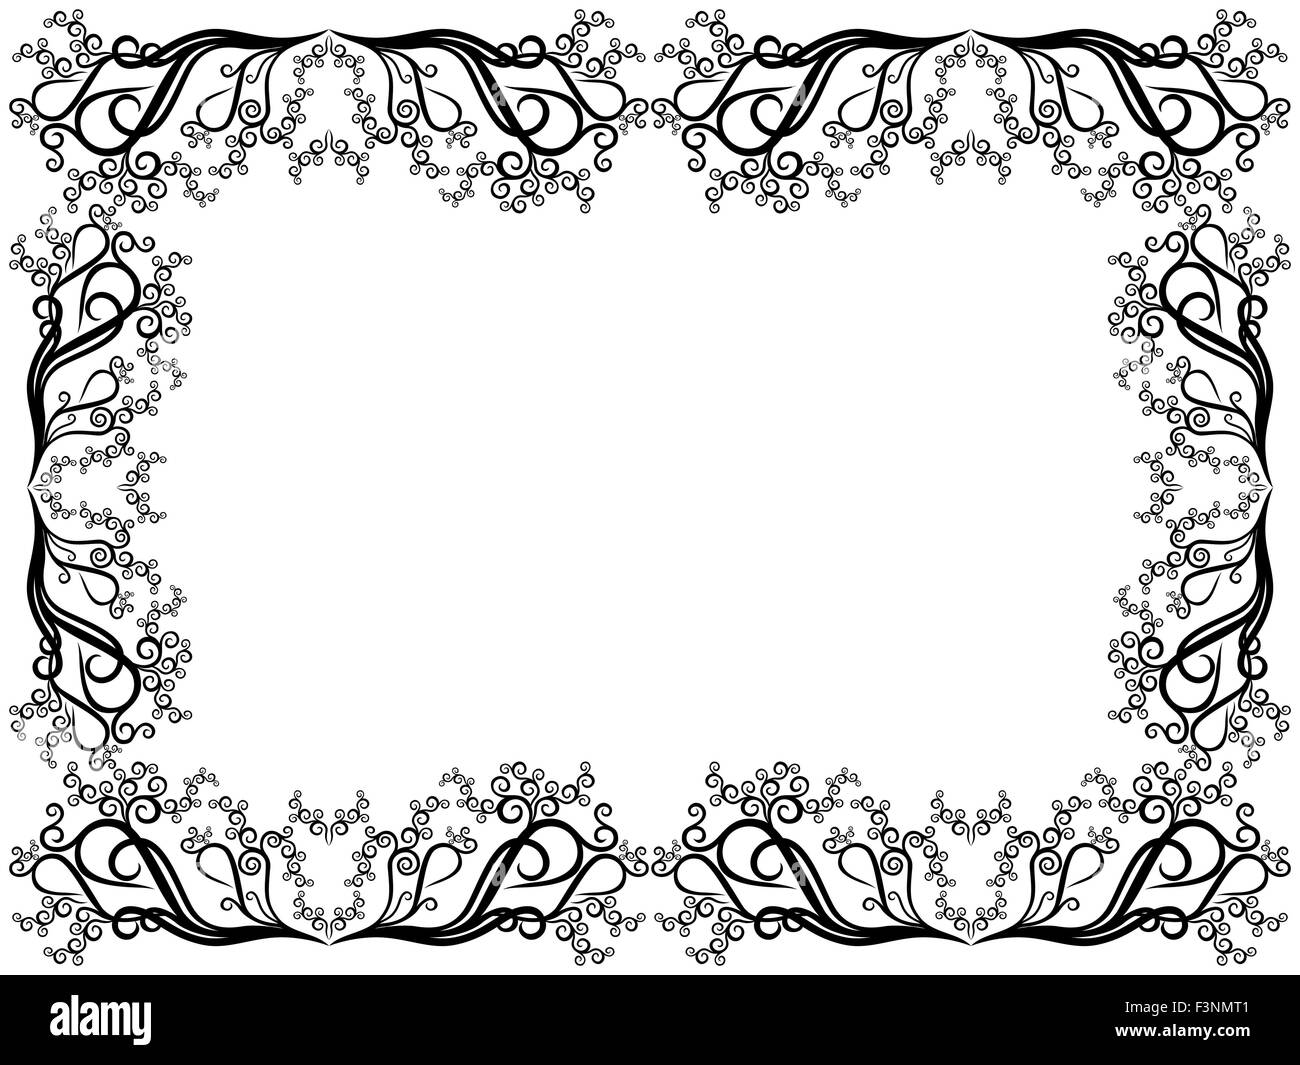 Black and white frame of blank with swirl floral elements, hand drawing vector artwork Stock Vector